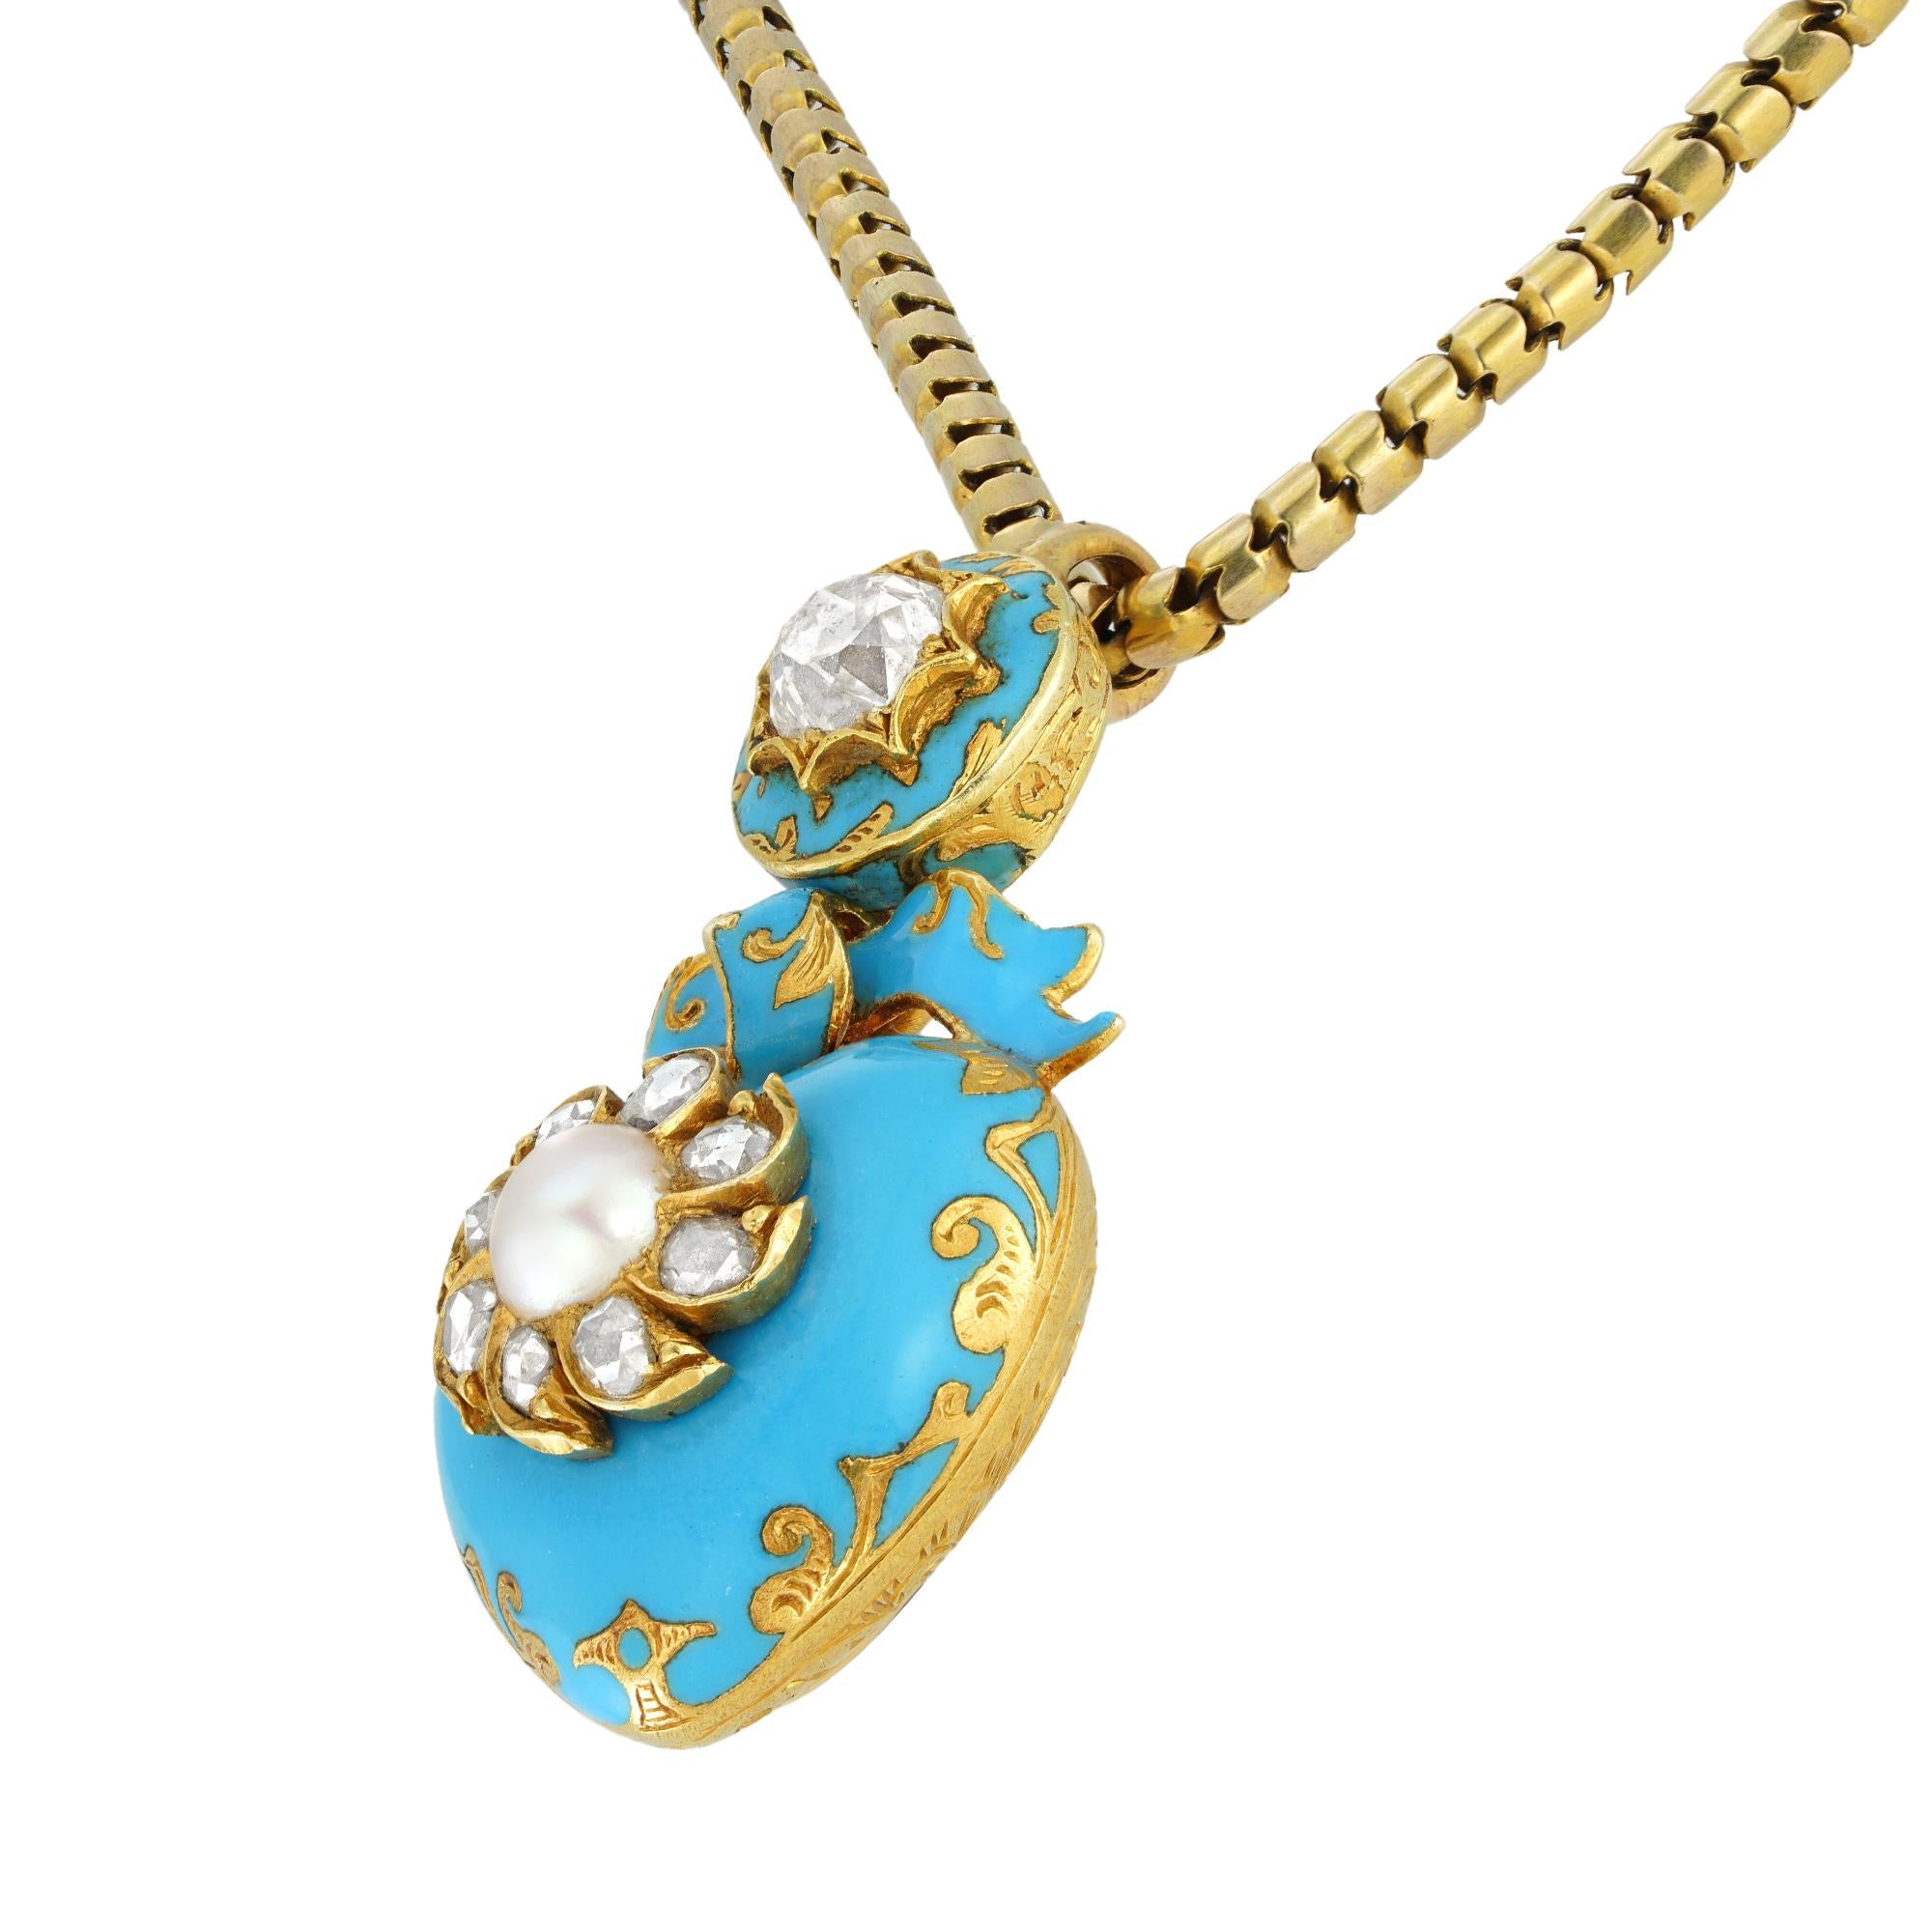 A Victorian heart-shaped blue enamel, pearl and diamond pendant-necklace, the heart-shaped locket centrally set with a round pearl surrounded by eight rose-cut diamonds on light-blue enamel background, suspended by a blue enamelled bow and a single